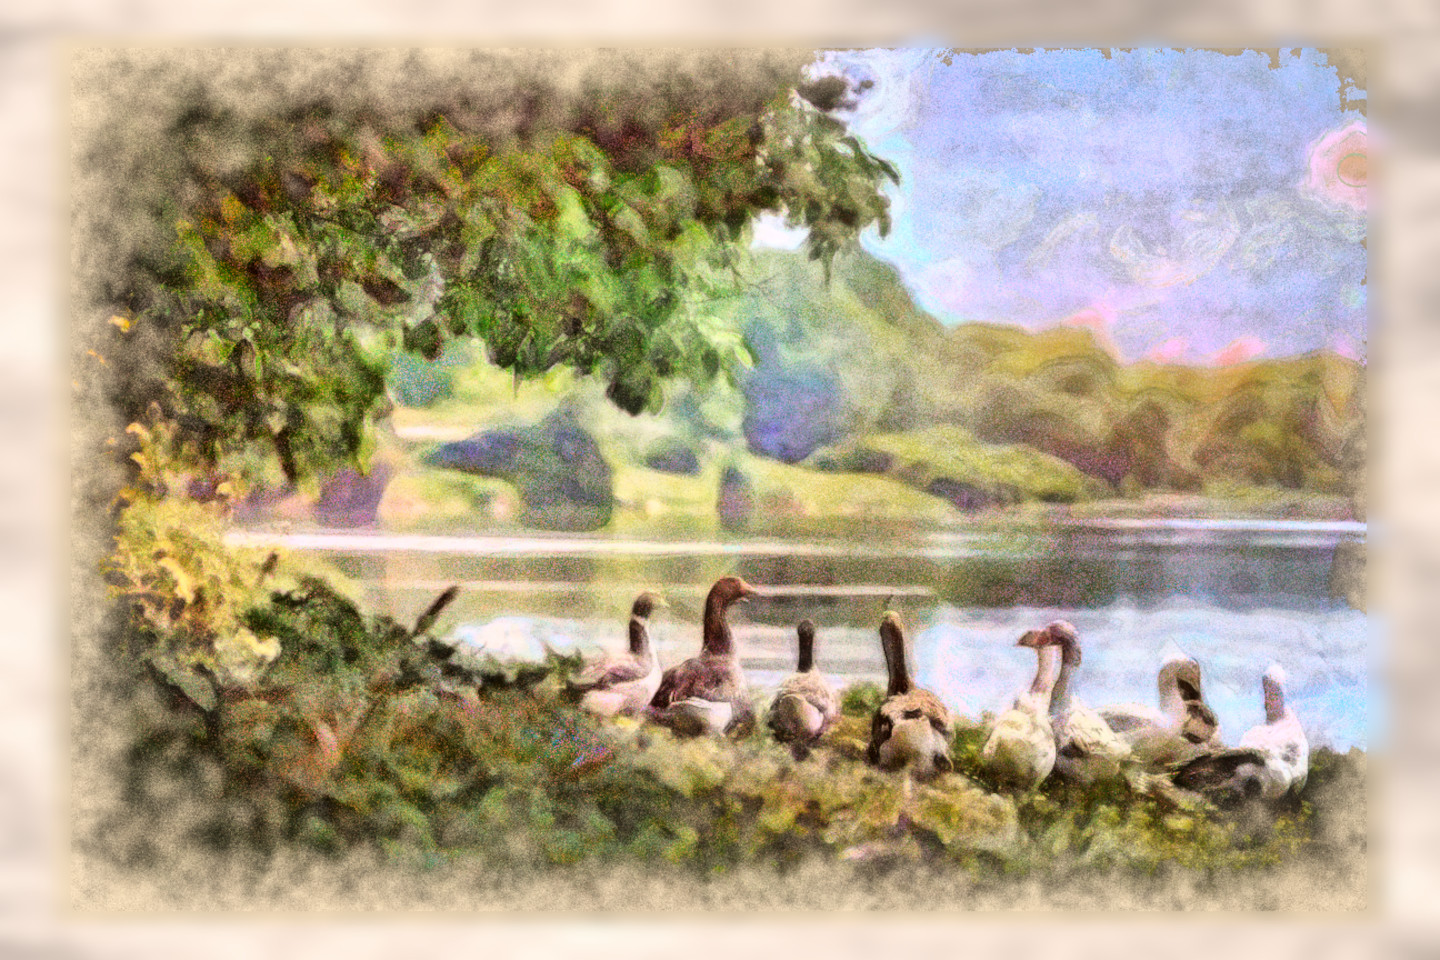 2023-09-29 21-16-49 wild-geese-3379677 with a Watercolor Pastels Effect 2023 (4.0,75.0,30.0,50.0,30.0,8.0,75.0,False,0).jpg